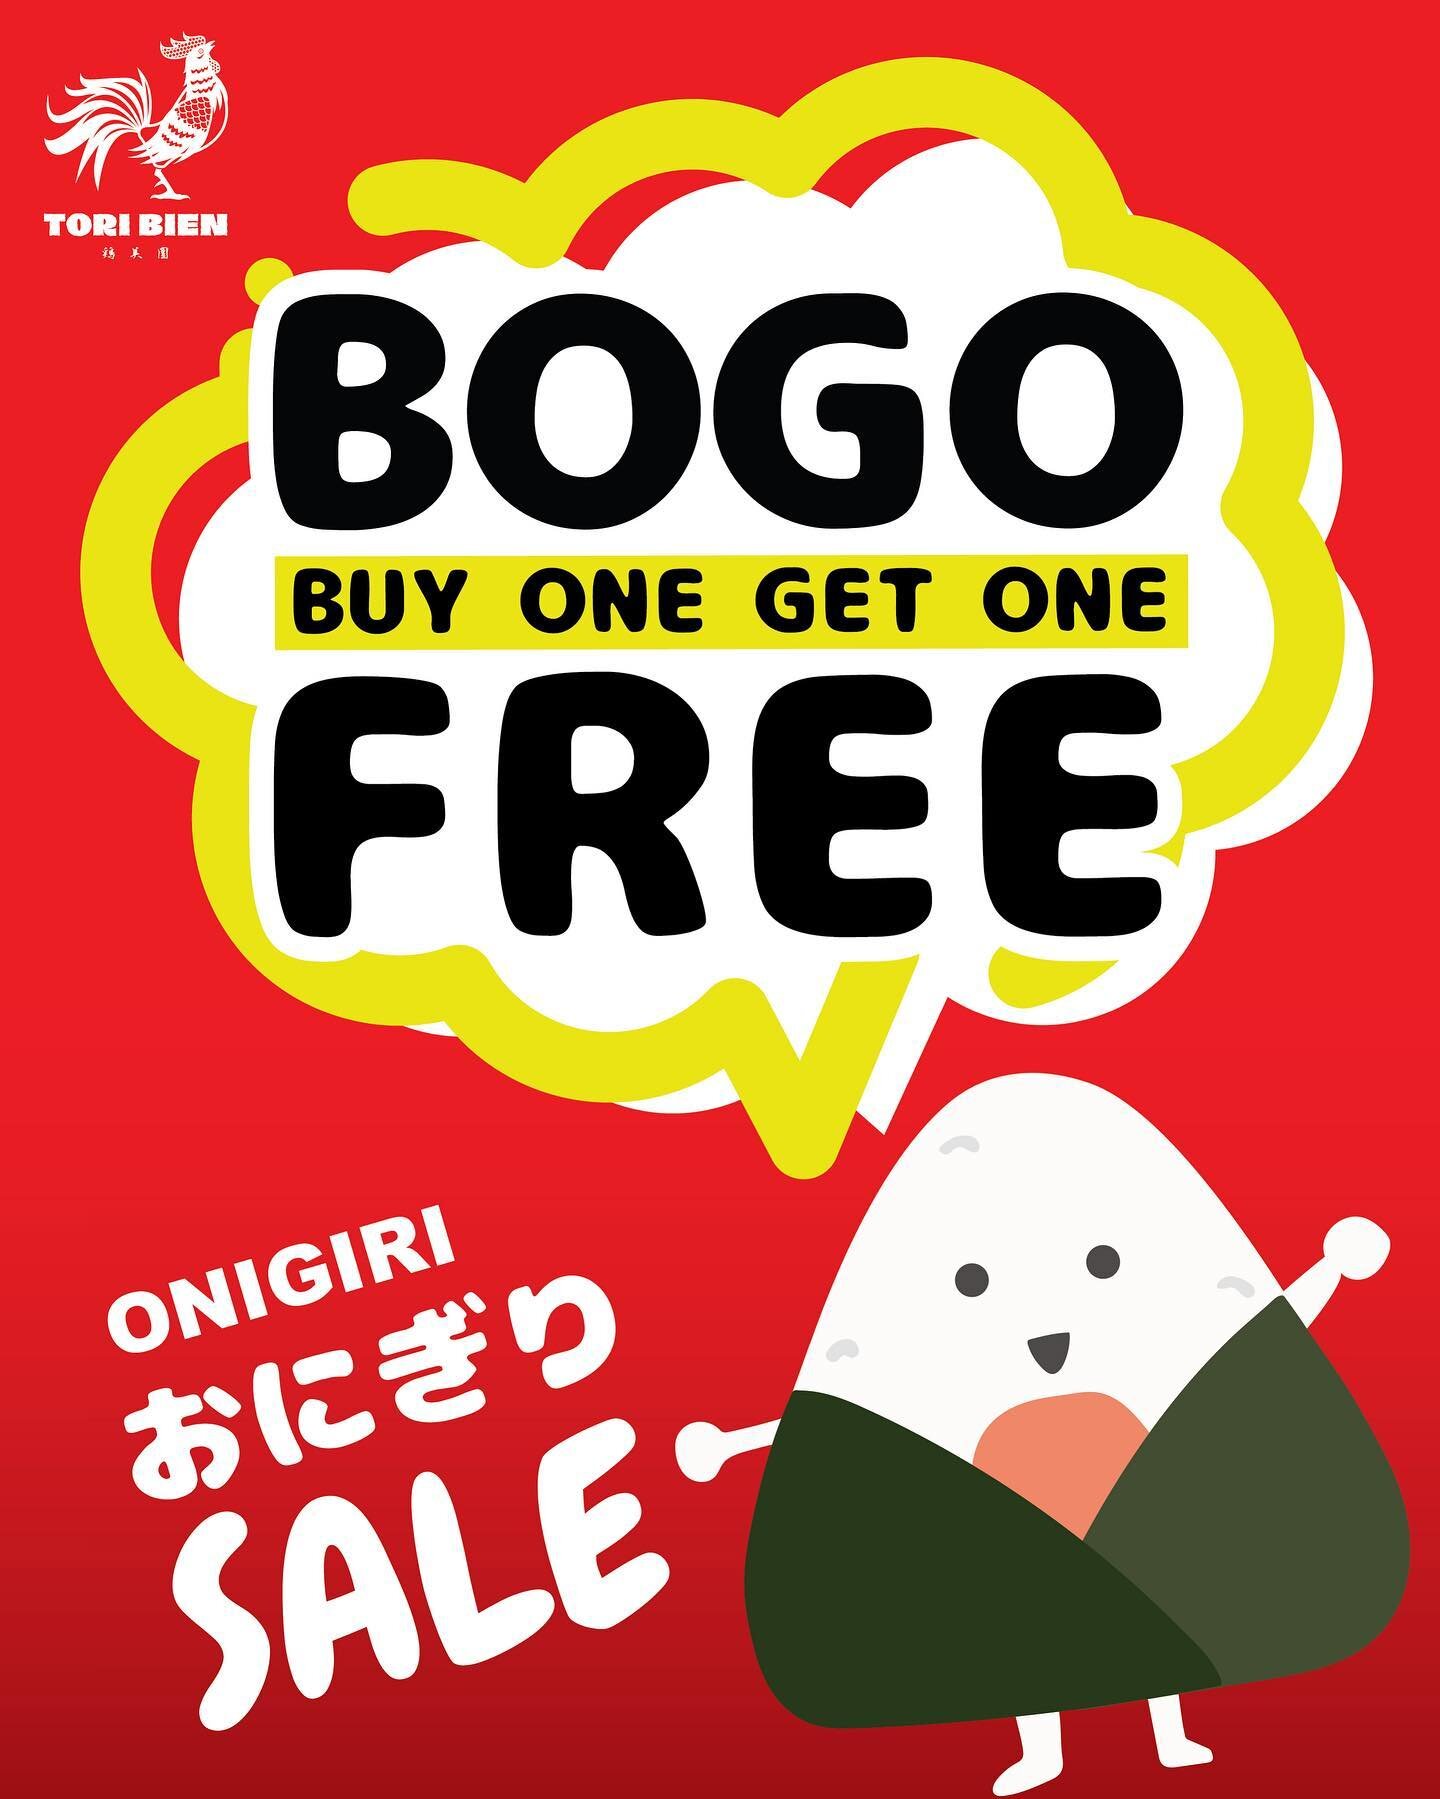 🔥BOGO 🇯🇵Onigiri 🍙 SALE! 🎁Buy One Get One Free! 🔥 @toribien_nyc 
*From 1 hour before closing. Limited to items on counter only. 
📍 Visit us at 220 E9th St, NY, NY (bet 2nd and 3rd av)
&bull;
&bull;
&bull;
#鶏美園 #karaage #japanesefriedchicken #gl